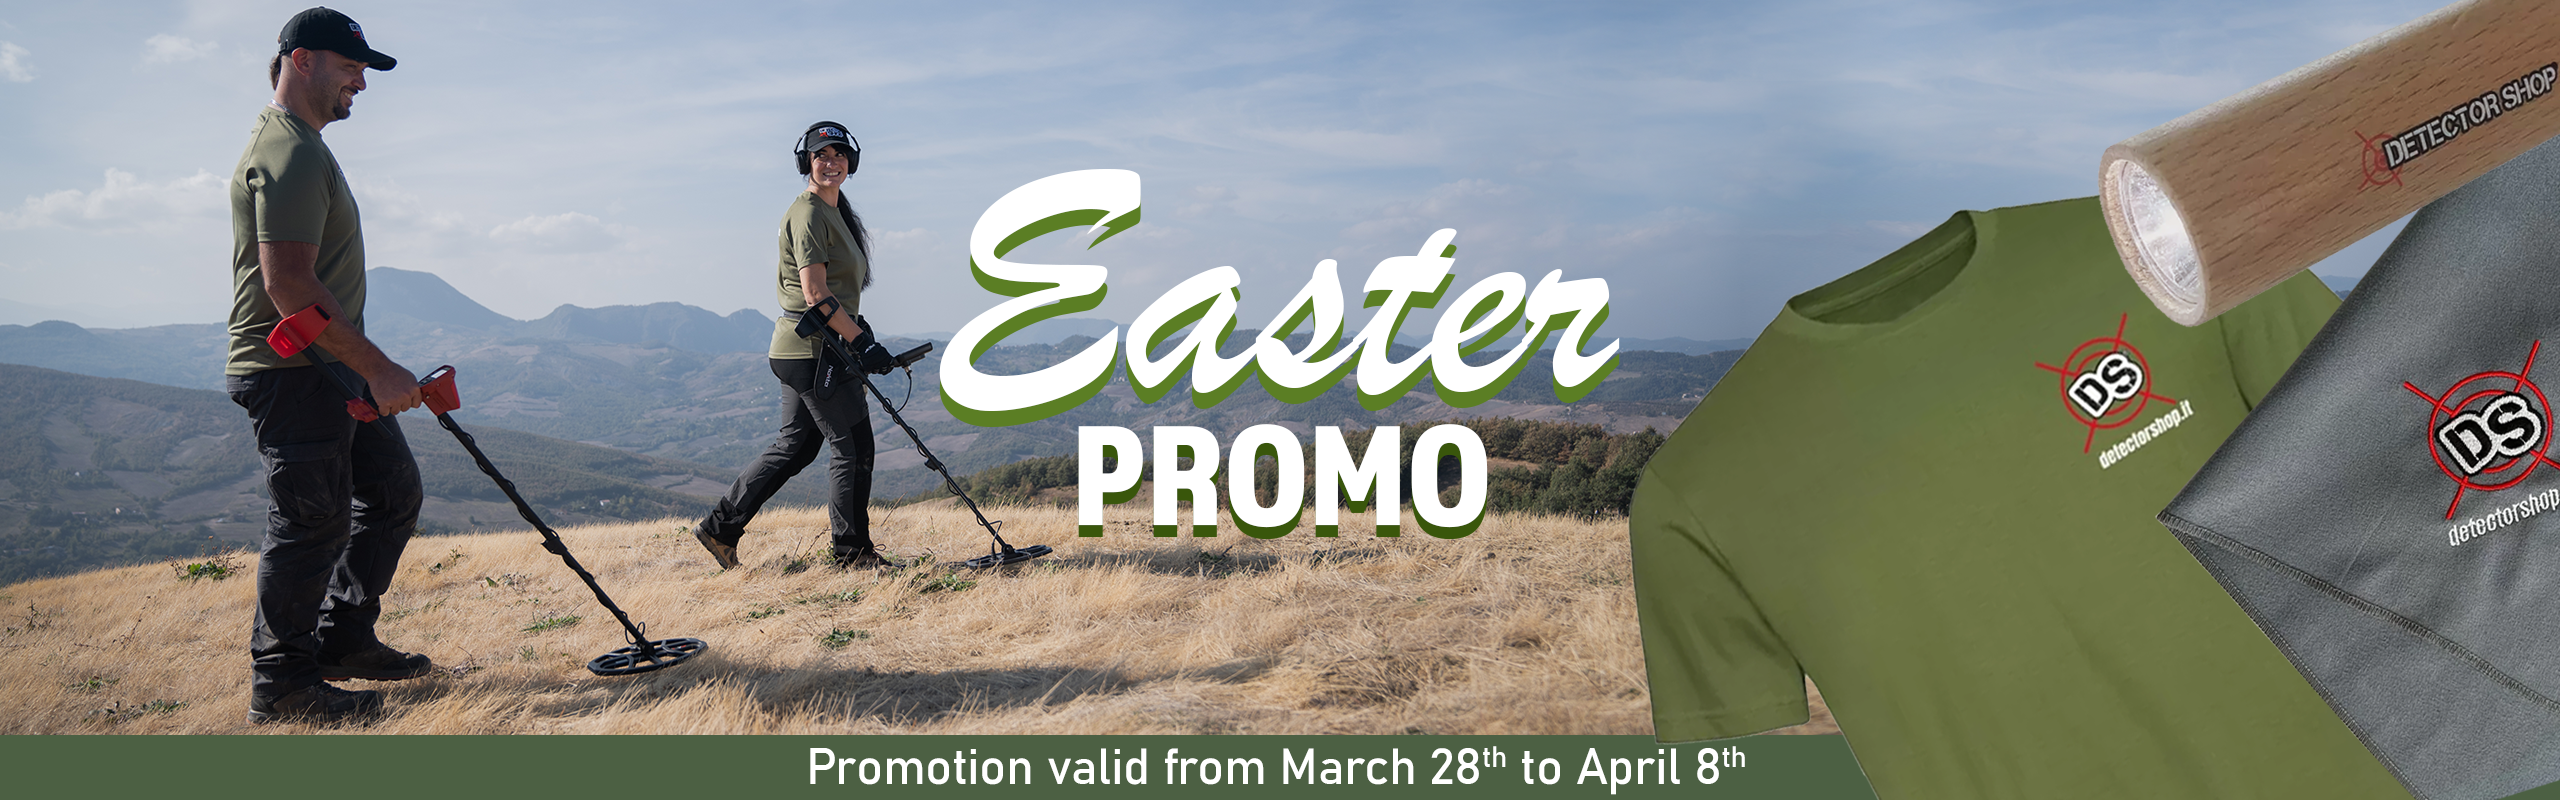 The Detectorshop Easter Promos are waiting for you!